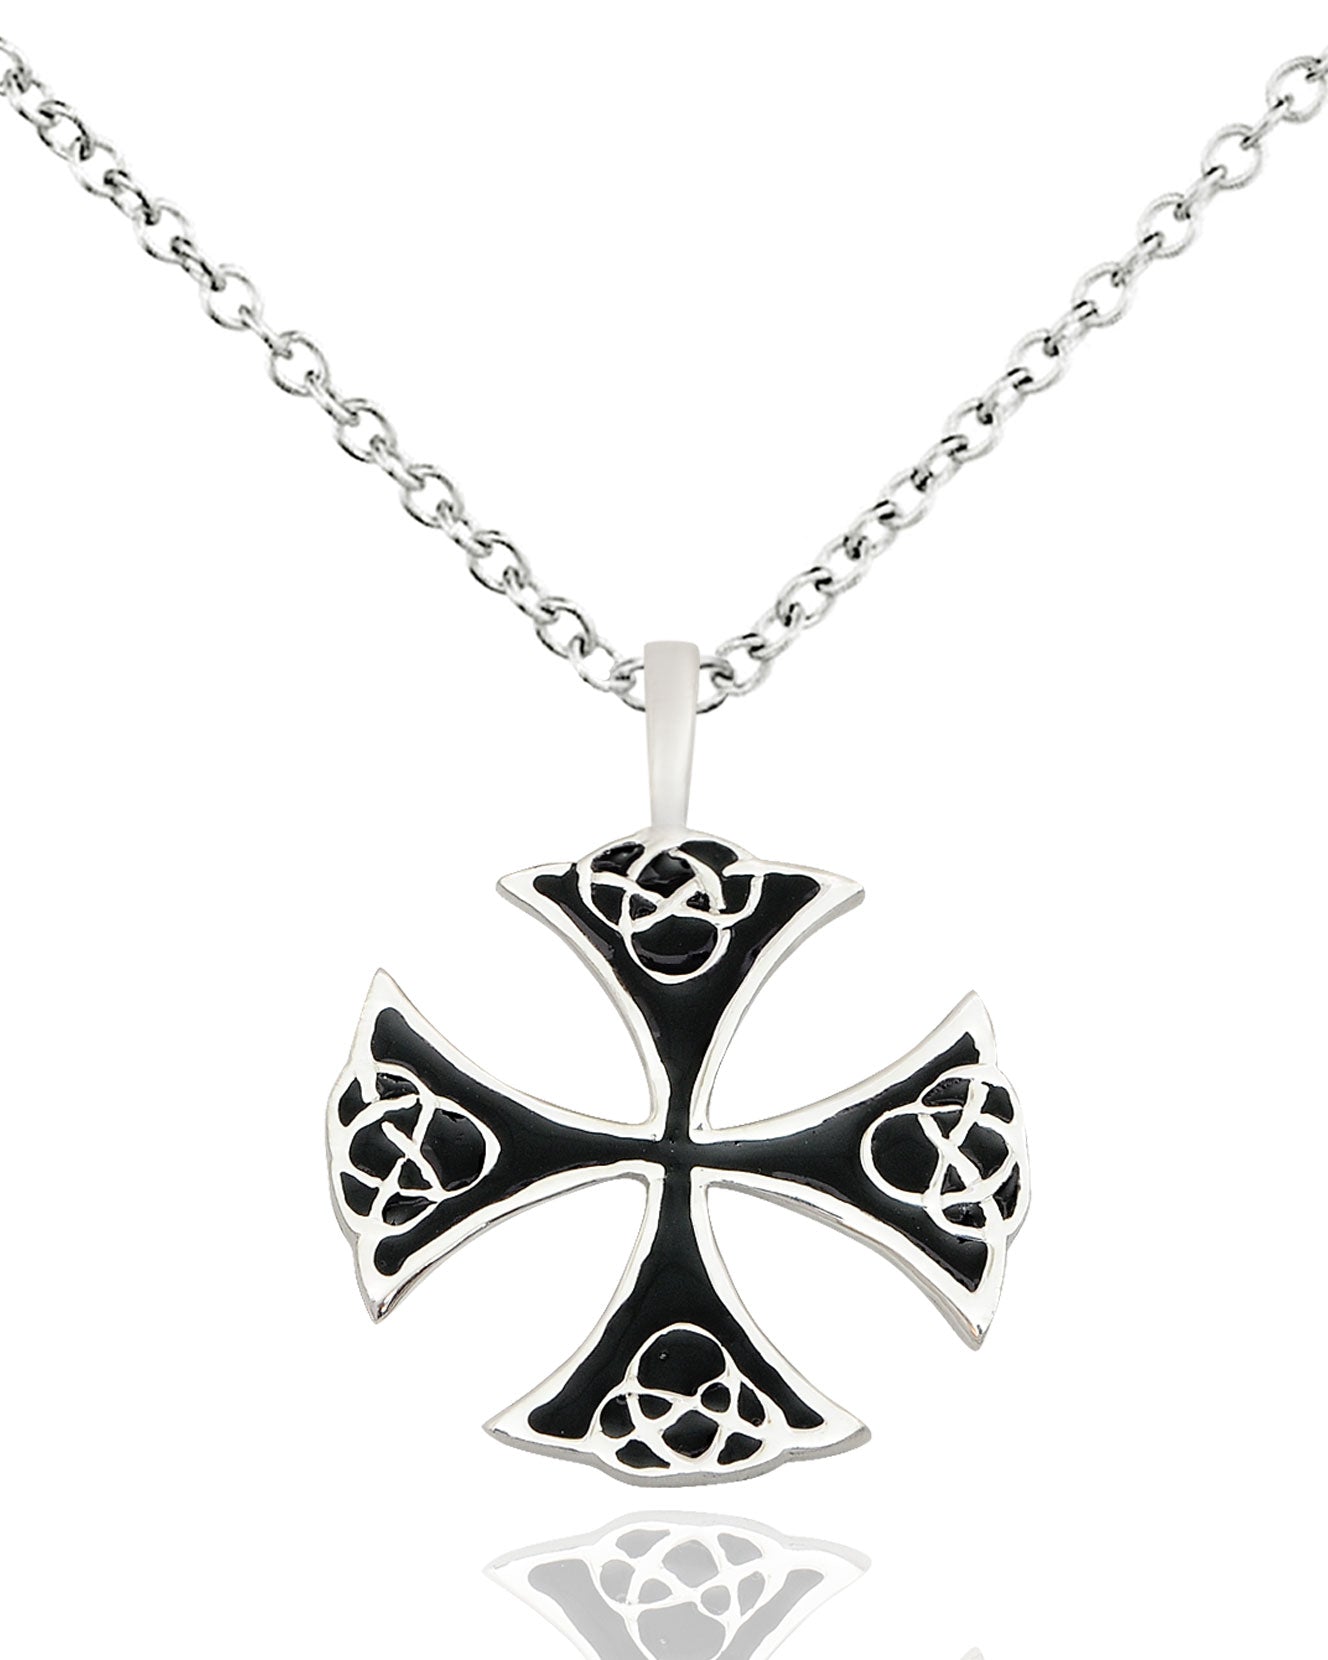 Celtic German Cross Silver Pewter Gold Brass Charm Necklace Pendant Jewelry